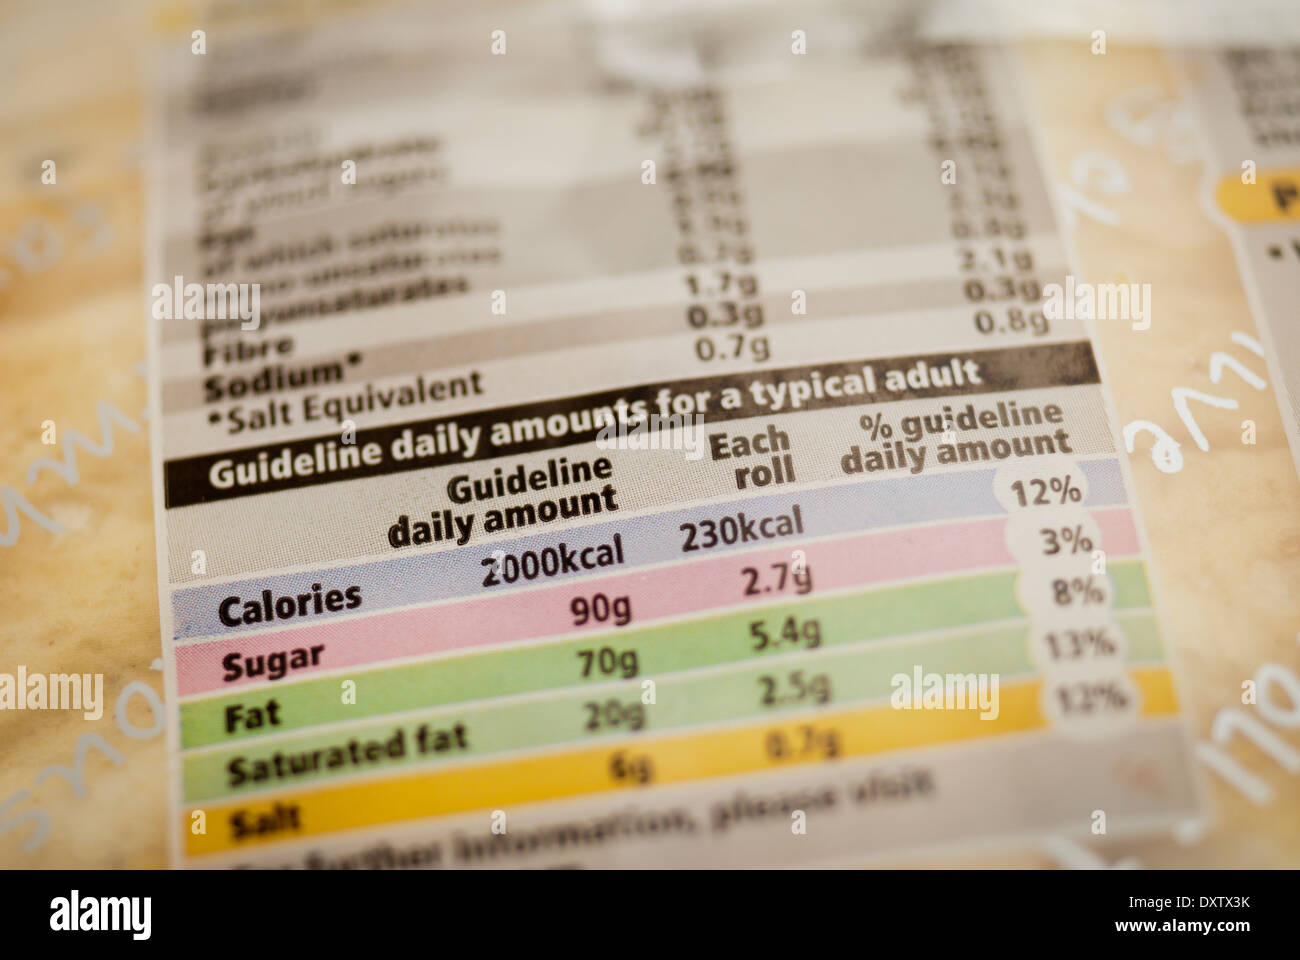 Food labeling Guidelines Showing Nutritional Information. Stock Photo